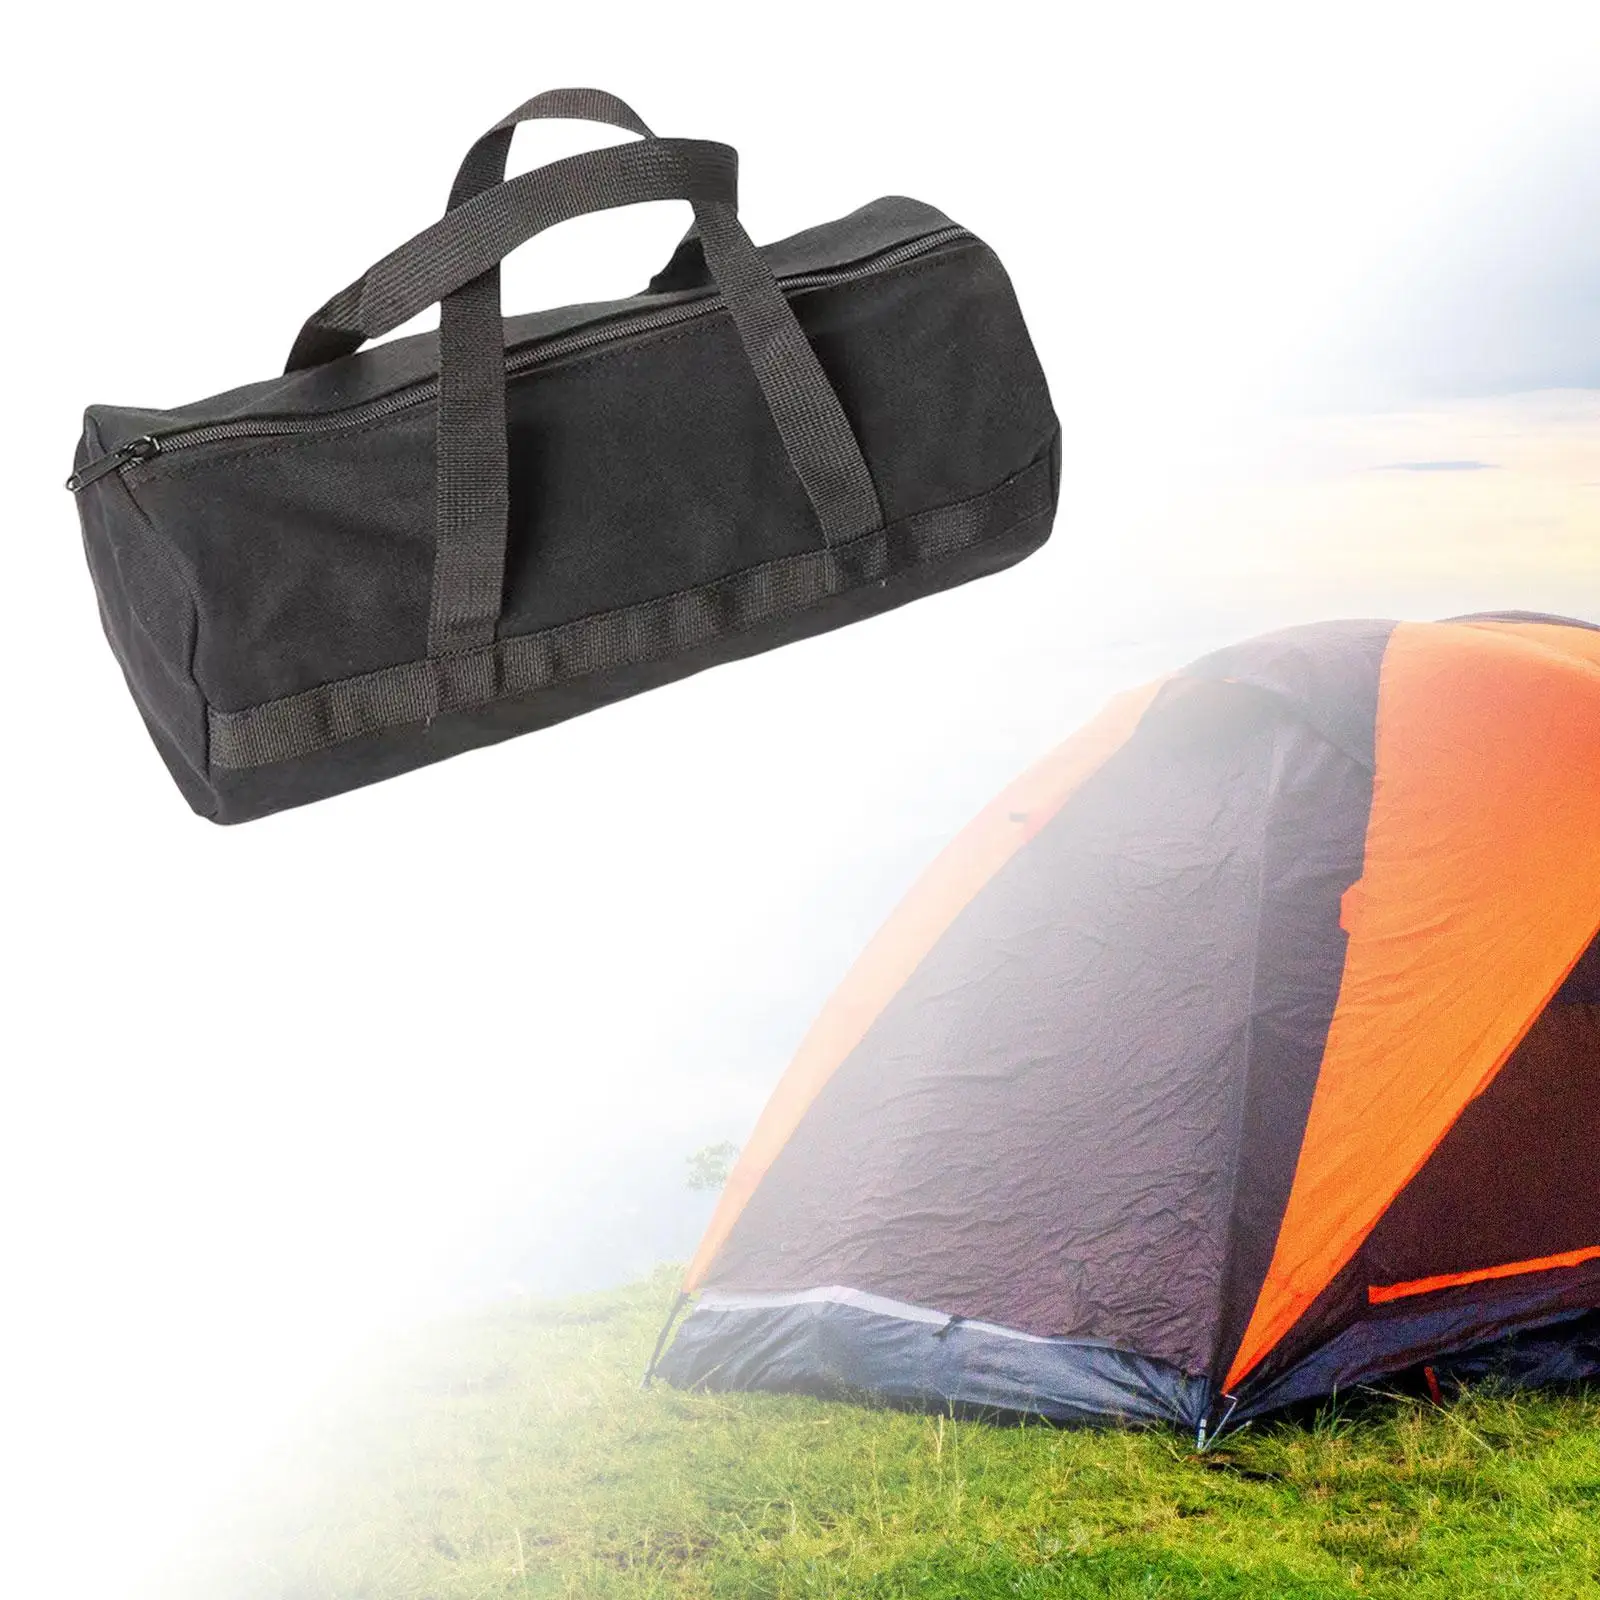 Tent Stakes Storage Bag Large Capacity Bags for Camping Picnic Gardening